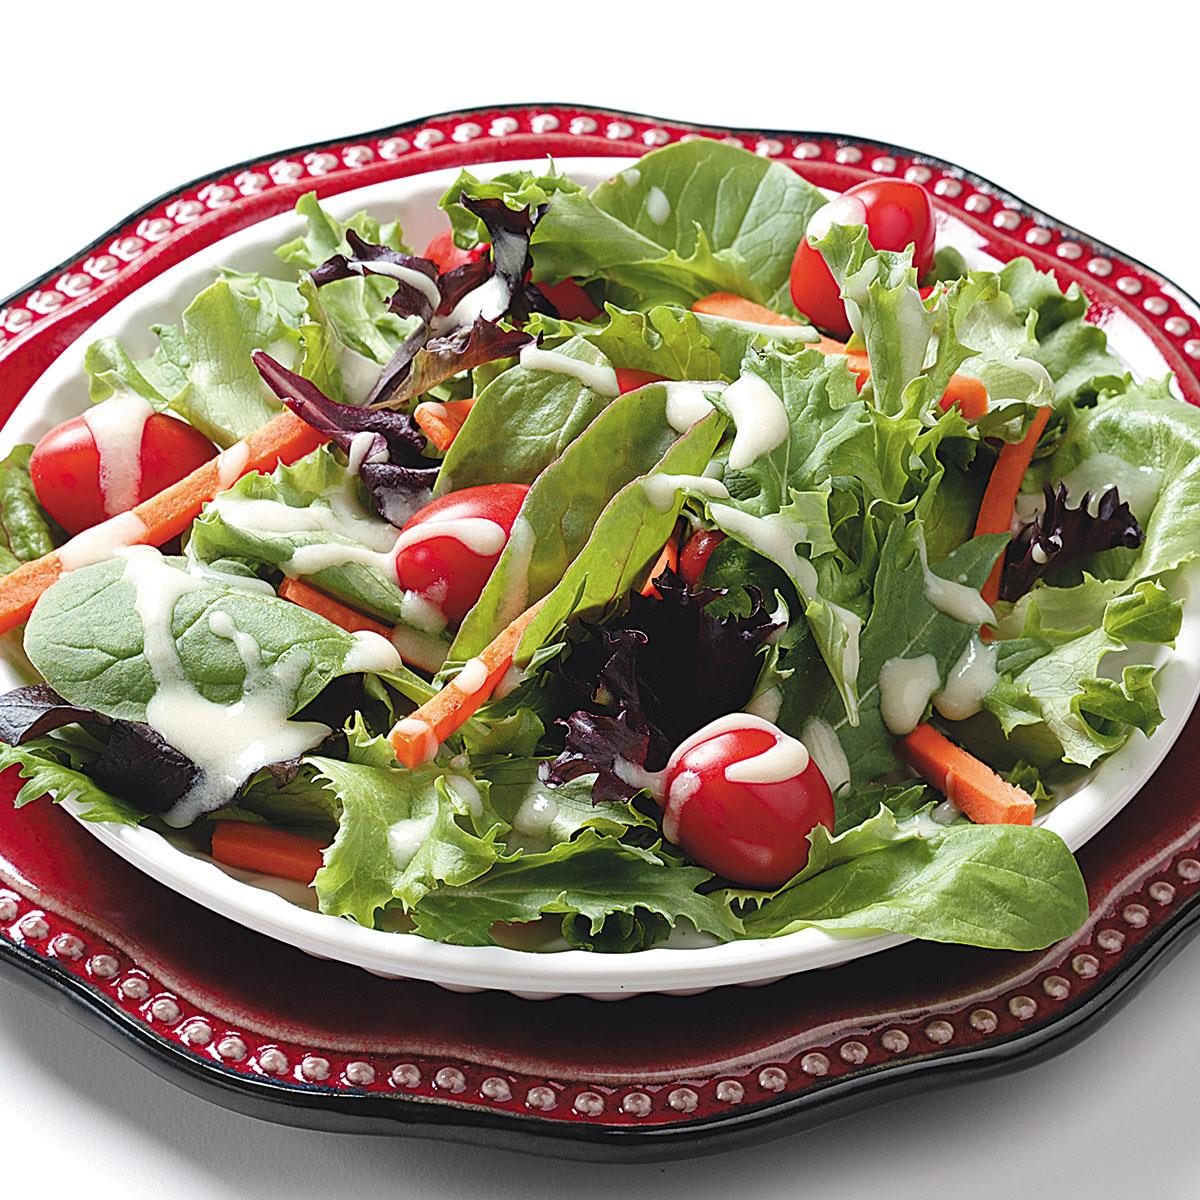 Mixed Greens With Honey Mustard Dressing Recipe How To Make It